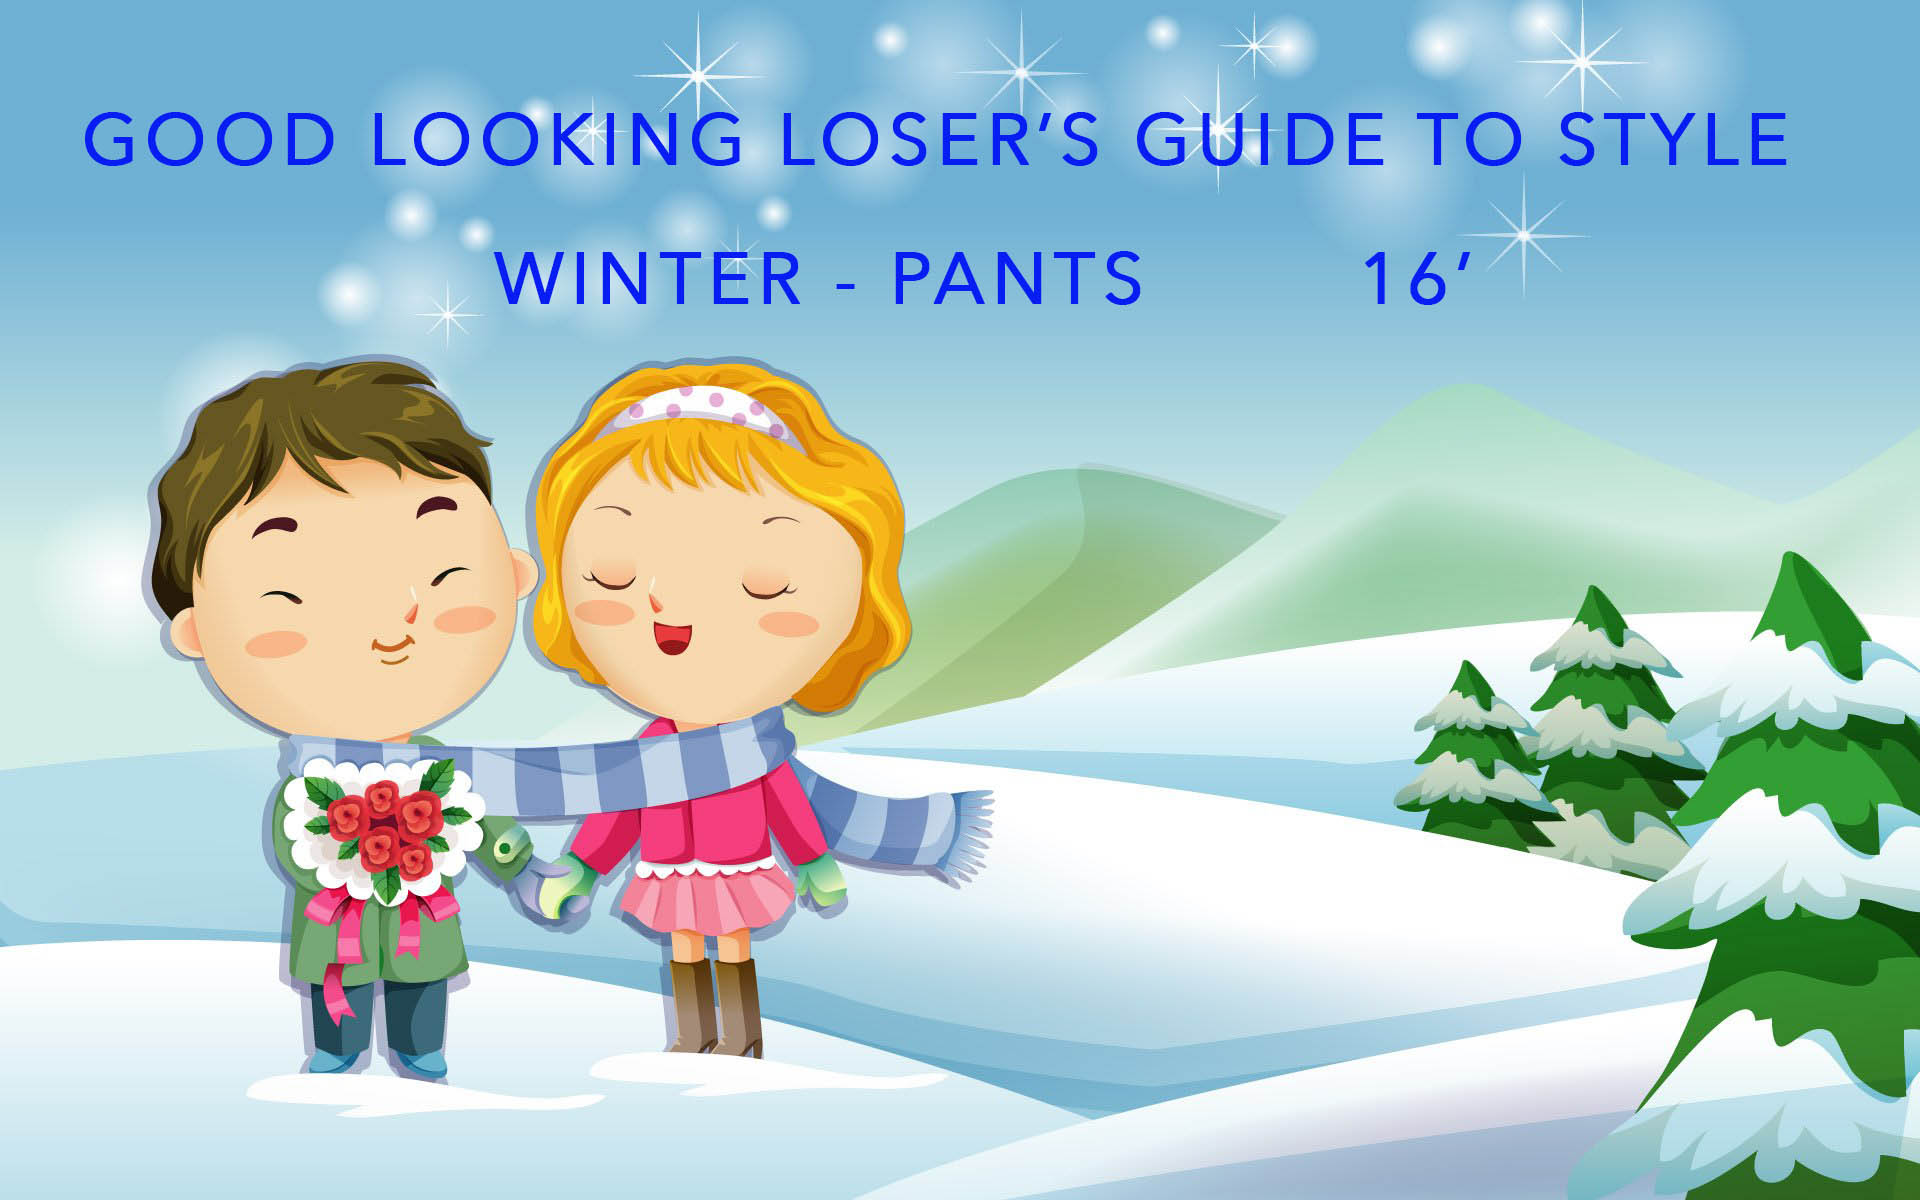 Good Looking Loser's Winter 2016 Guide to Style (Pants)